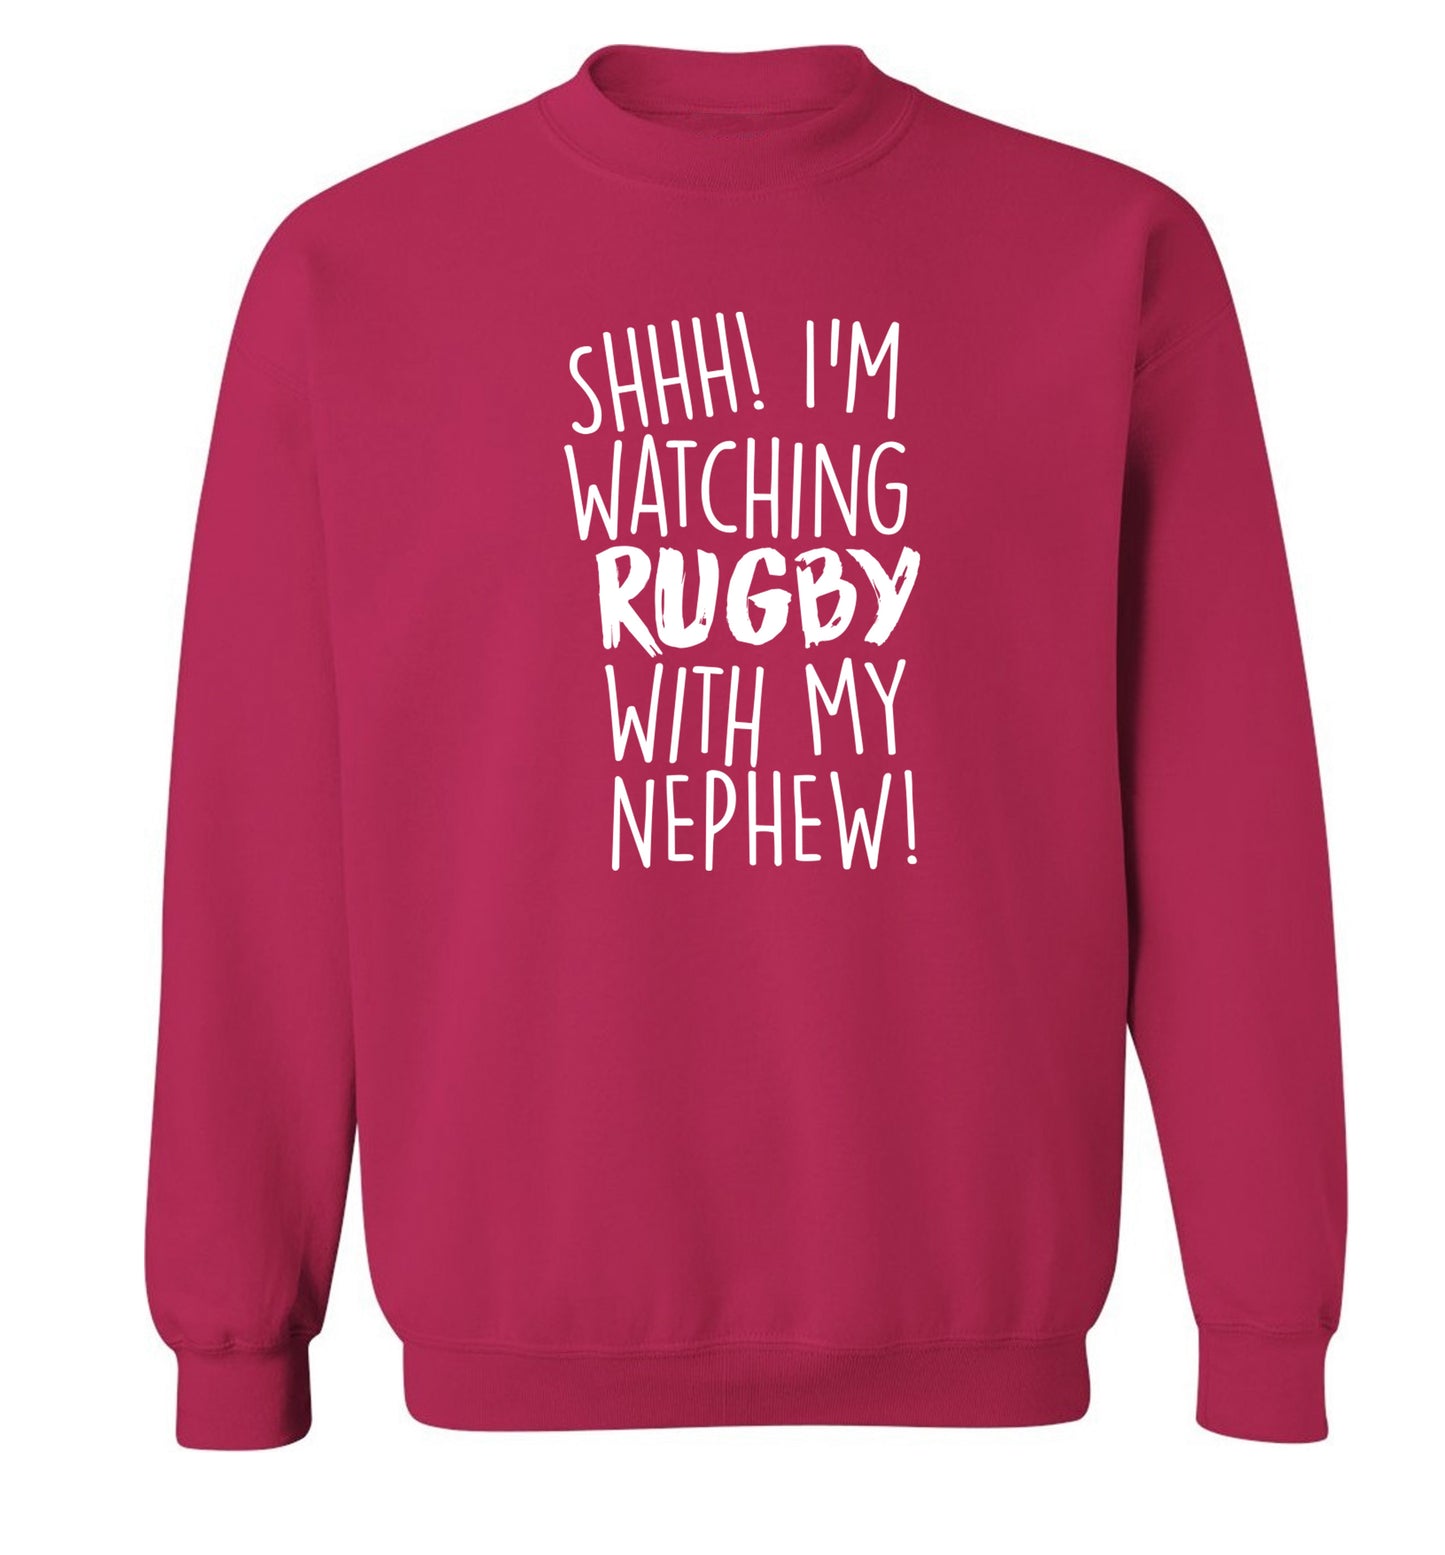 Shh.. I'm watching rugby with my nephew Adult's unisex pink Sweater 2XL